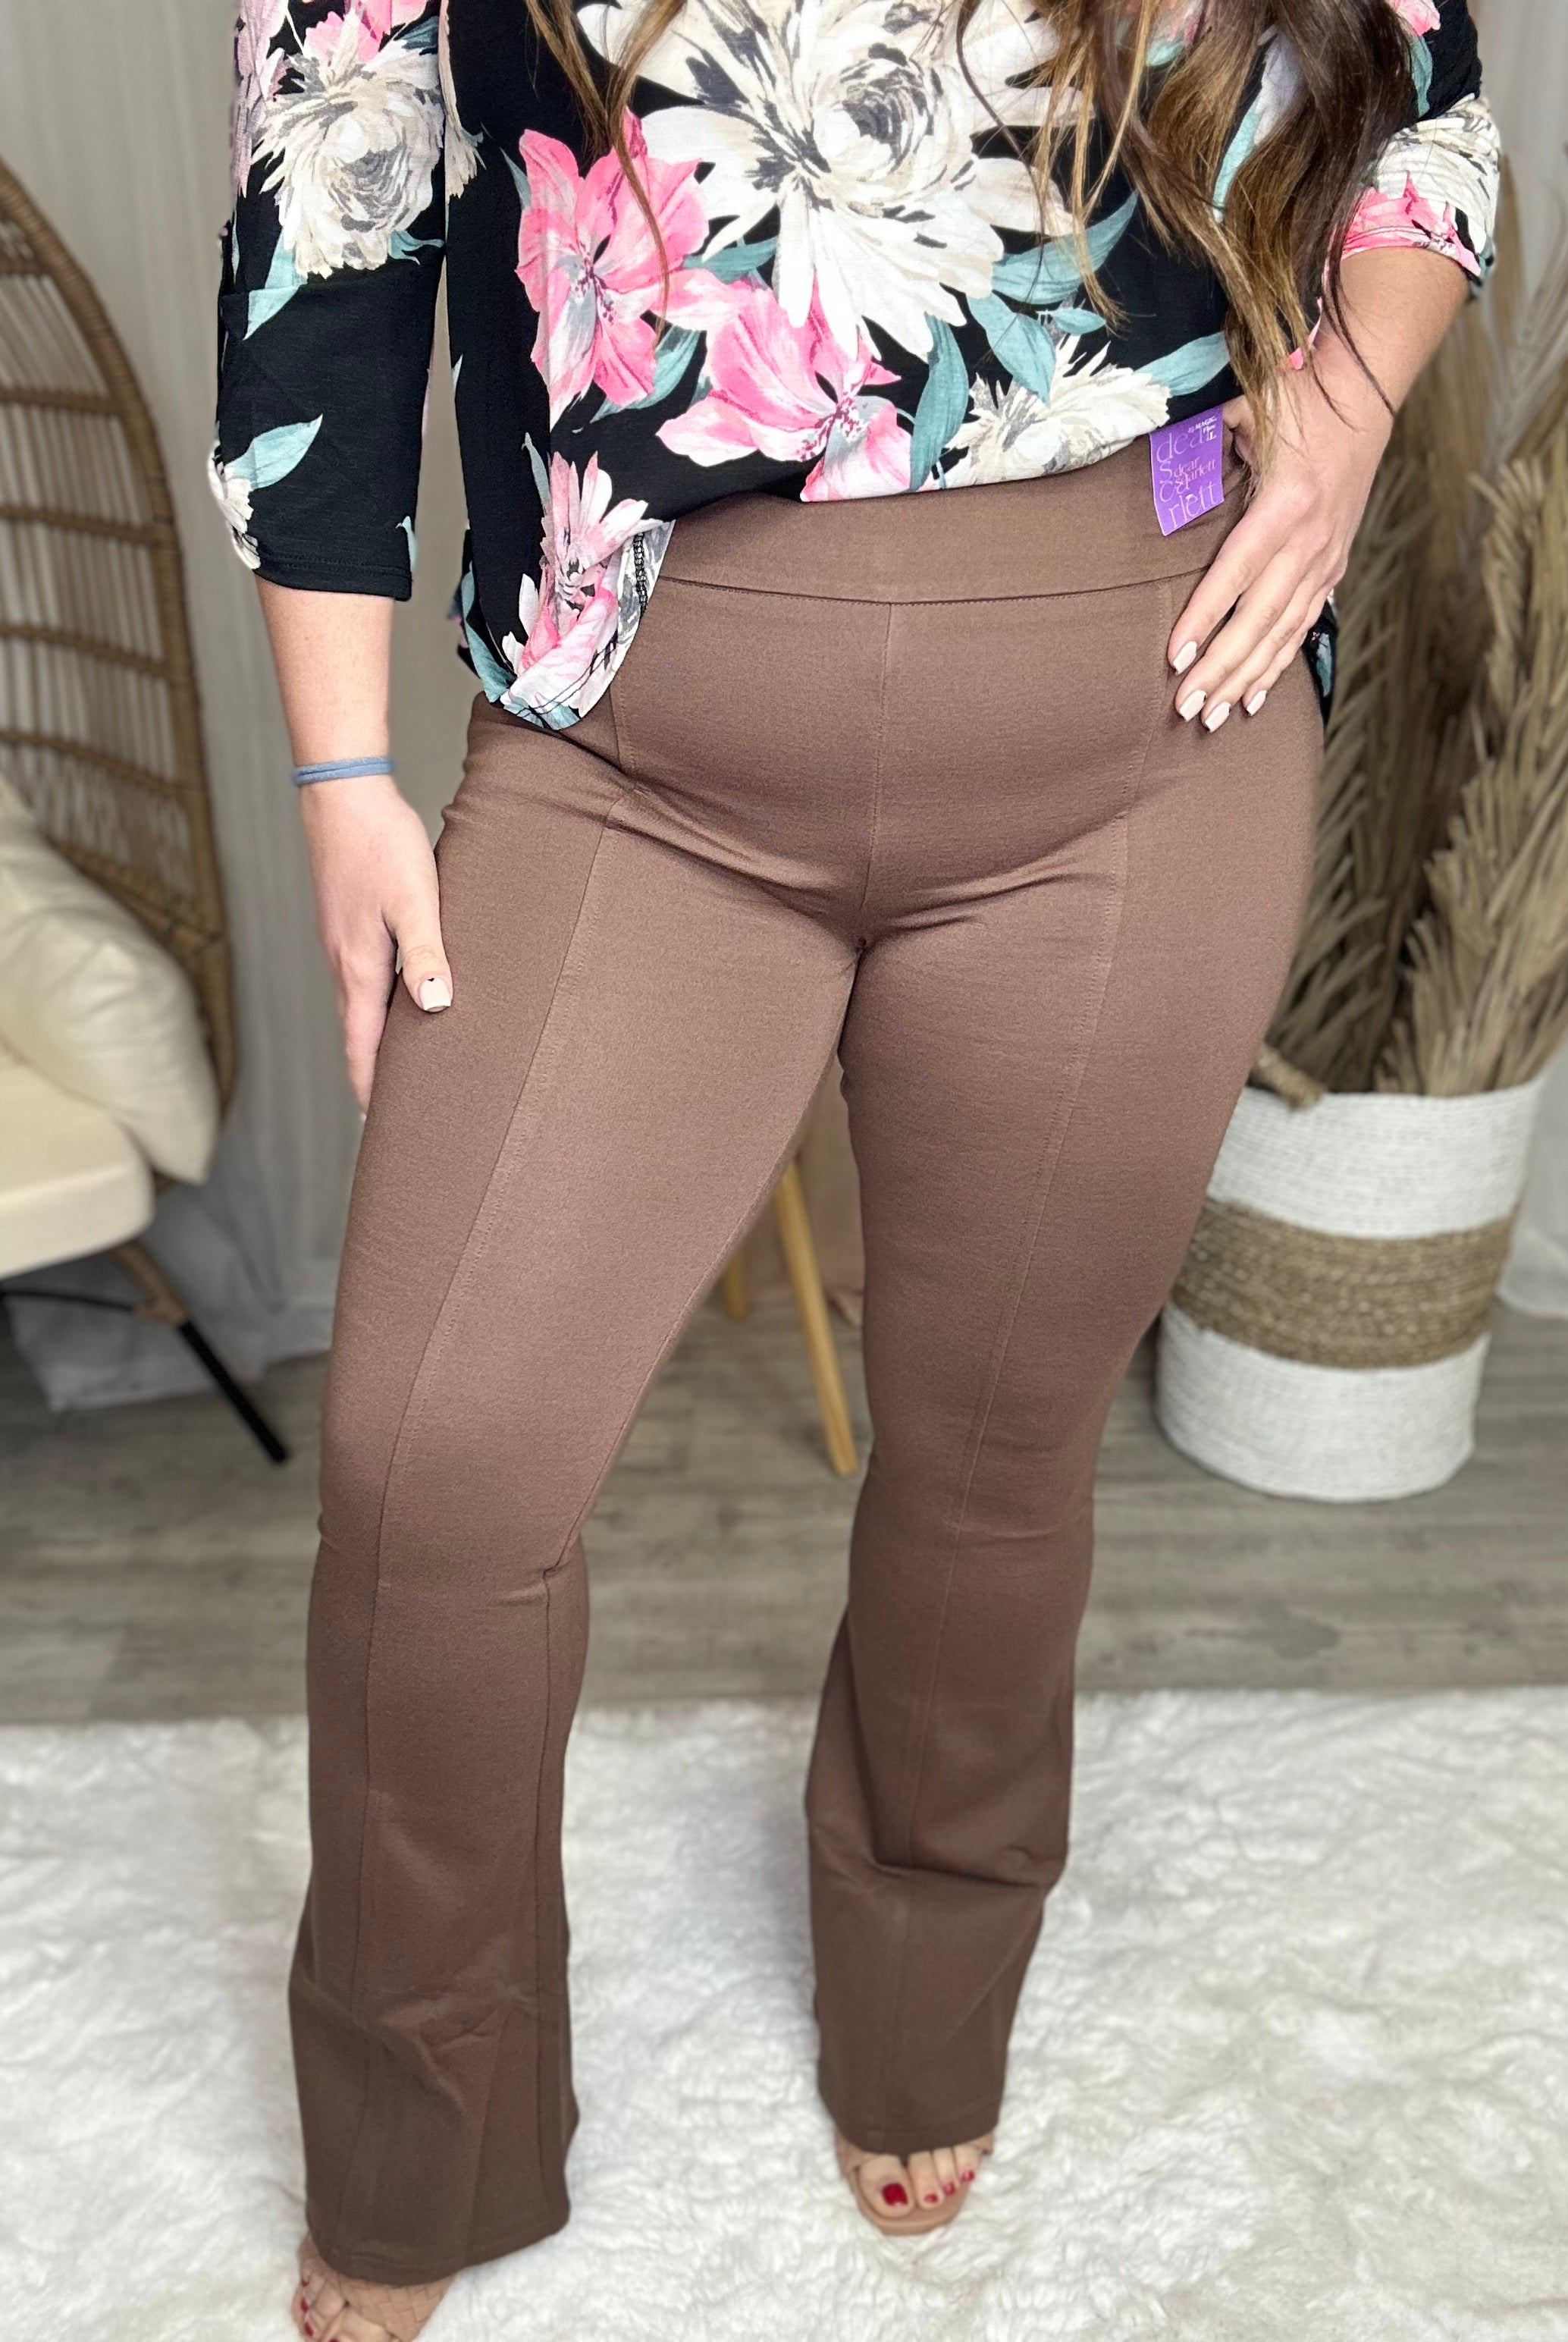 RESTOCK : Draw Me in Pants-150 PANTS-DEAR SCARLETT-Heathered Boho Boutique, Women's Fashion and Accessories in Palmetto, FL